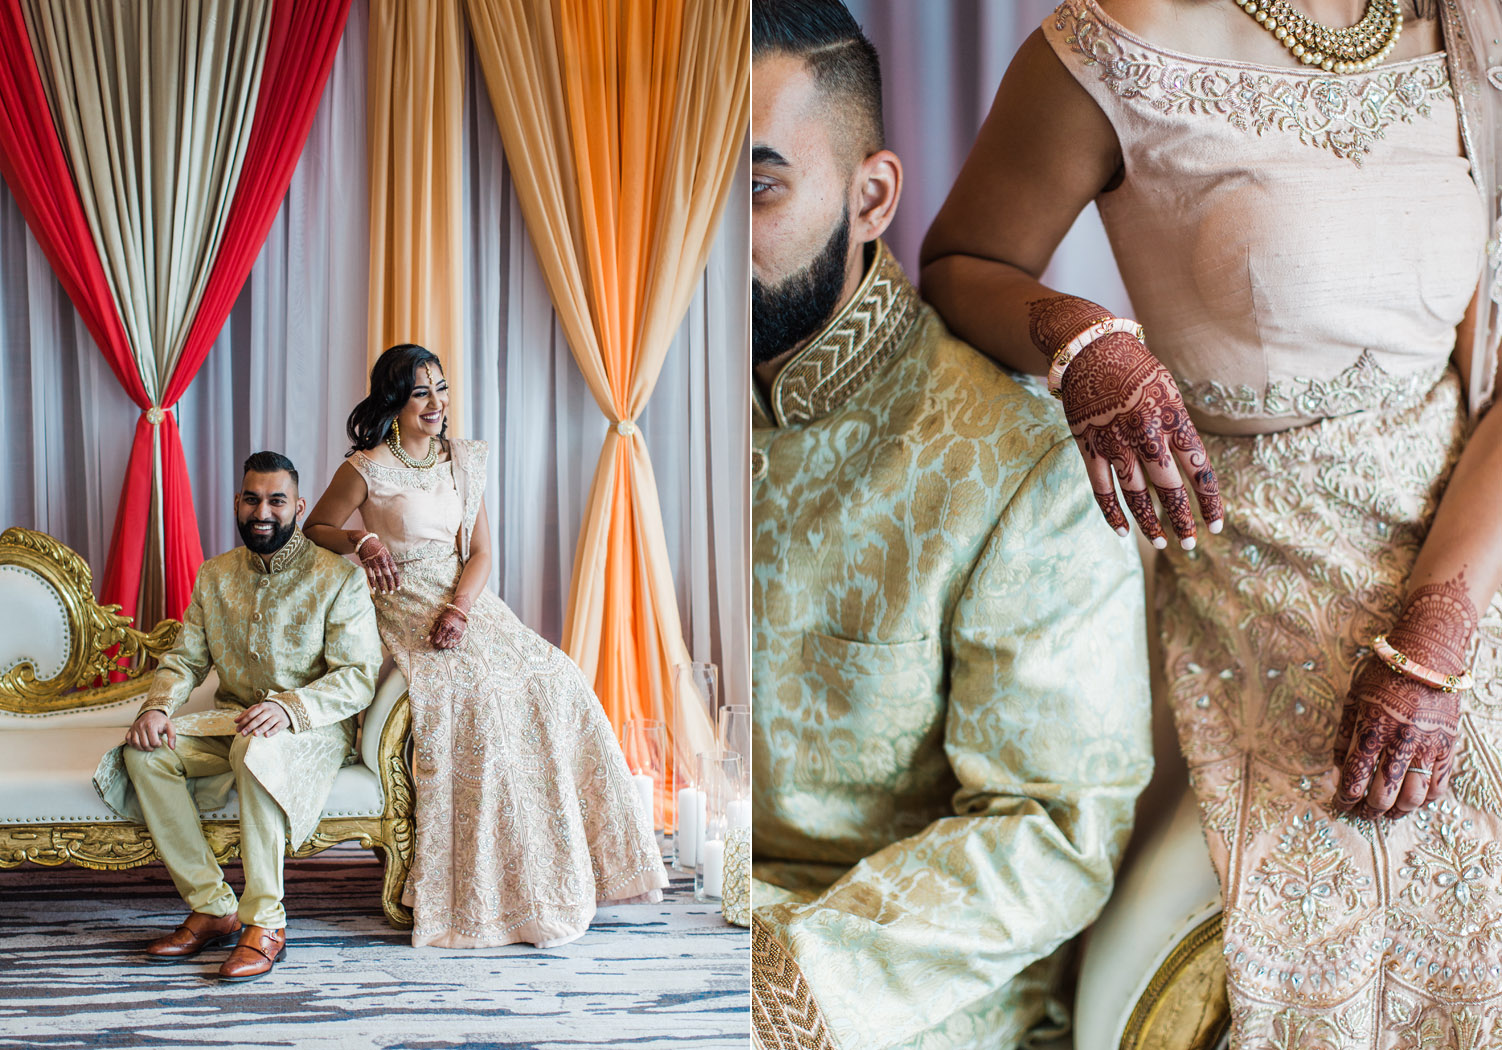 Alexandra Knight Photography Seattle Indian Wedding Photographer bride and groom in gold and blush wedding clothes with orange mandap.jpg